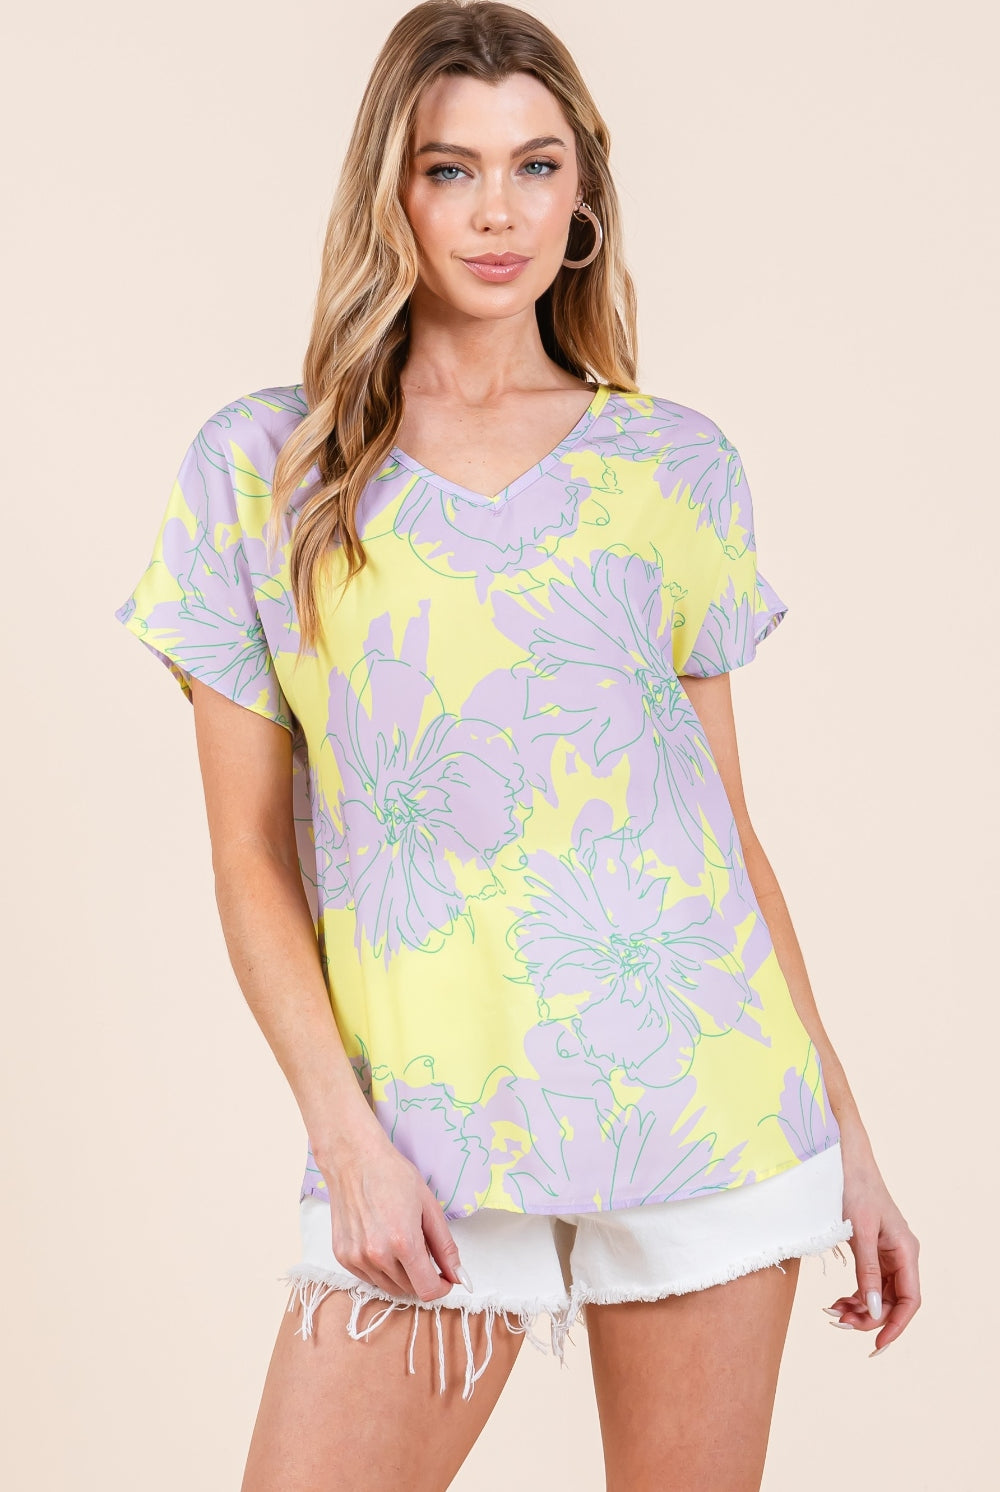 A woman wearing a vibrant yellow and purple floral short sleeve t-shirt, styled casually with white distressed shorts for a fresh, summery look.